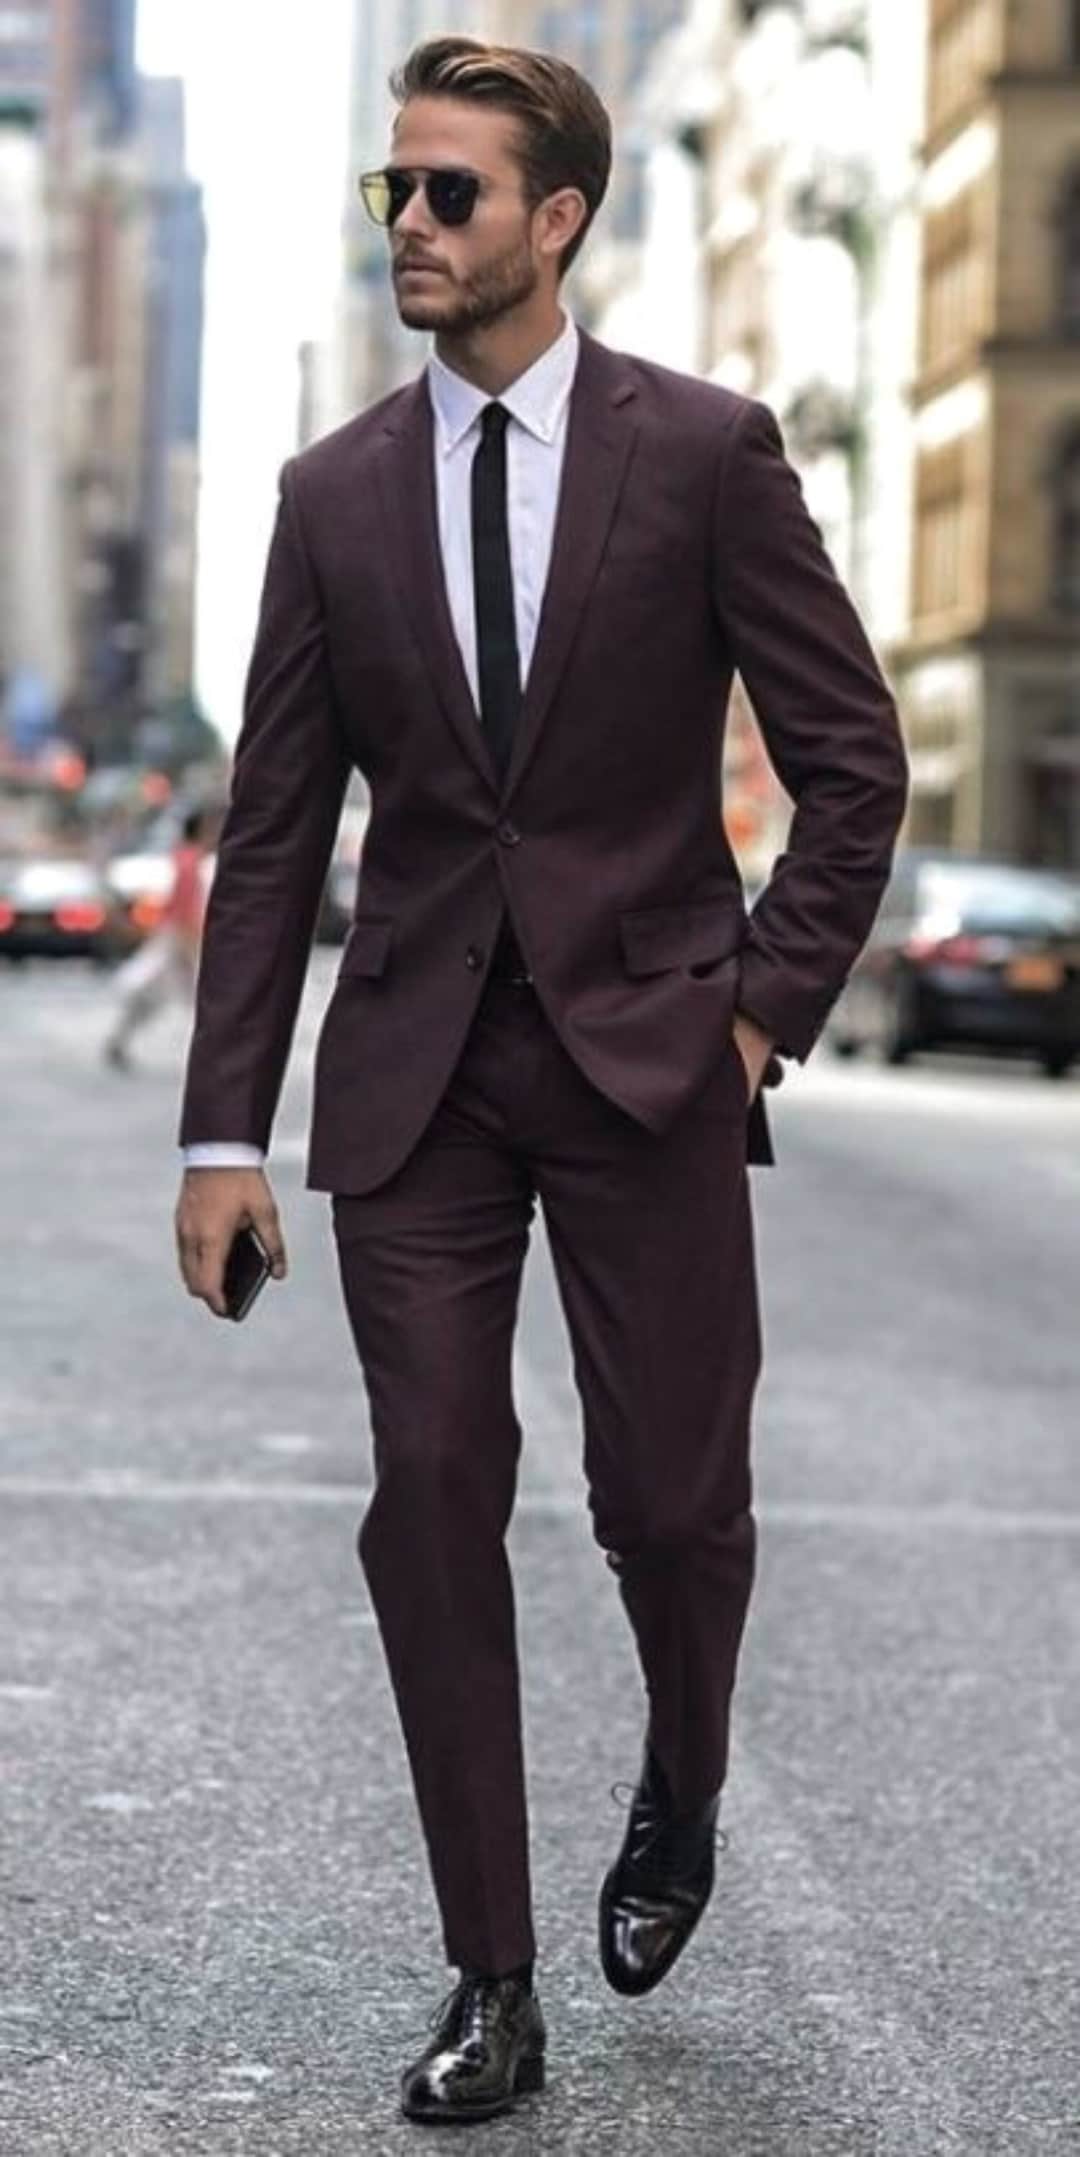 Menista Suit Classy Two Piece Wine Mens Suit for Wedding - Etsy